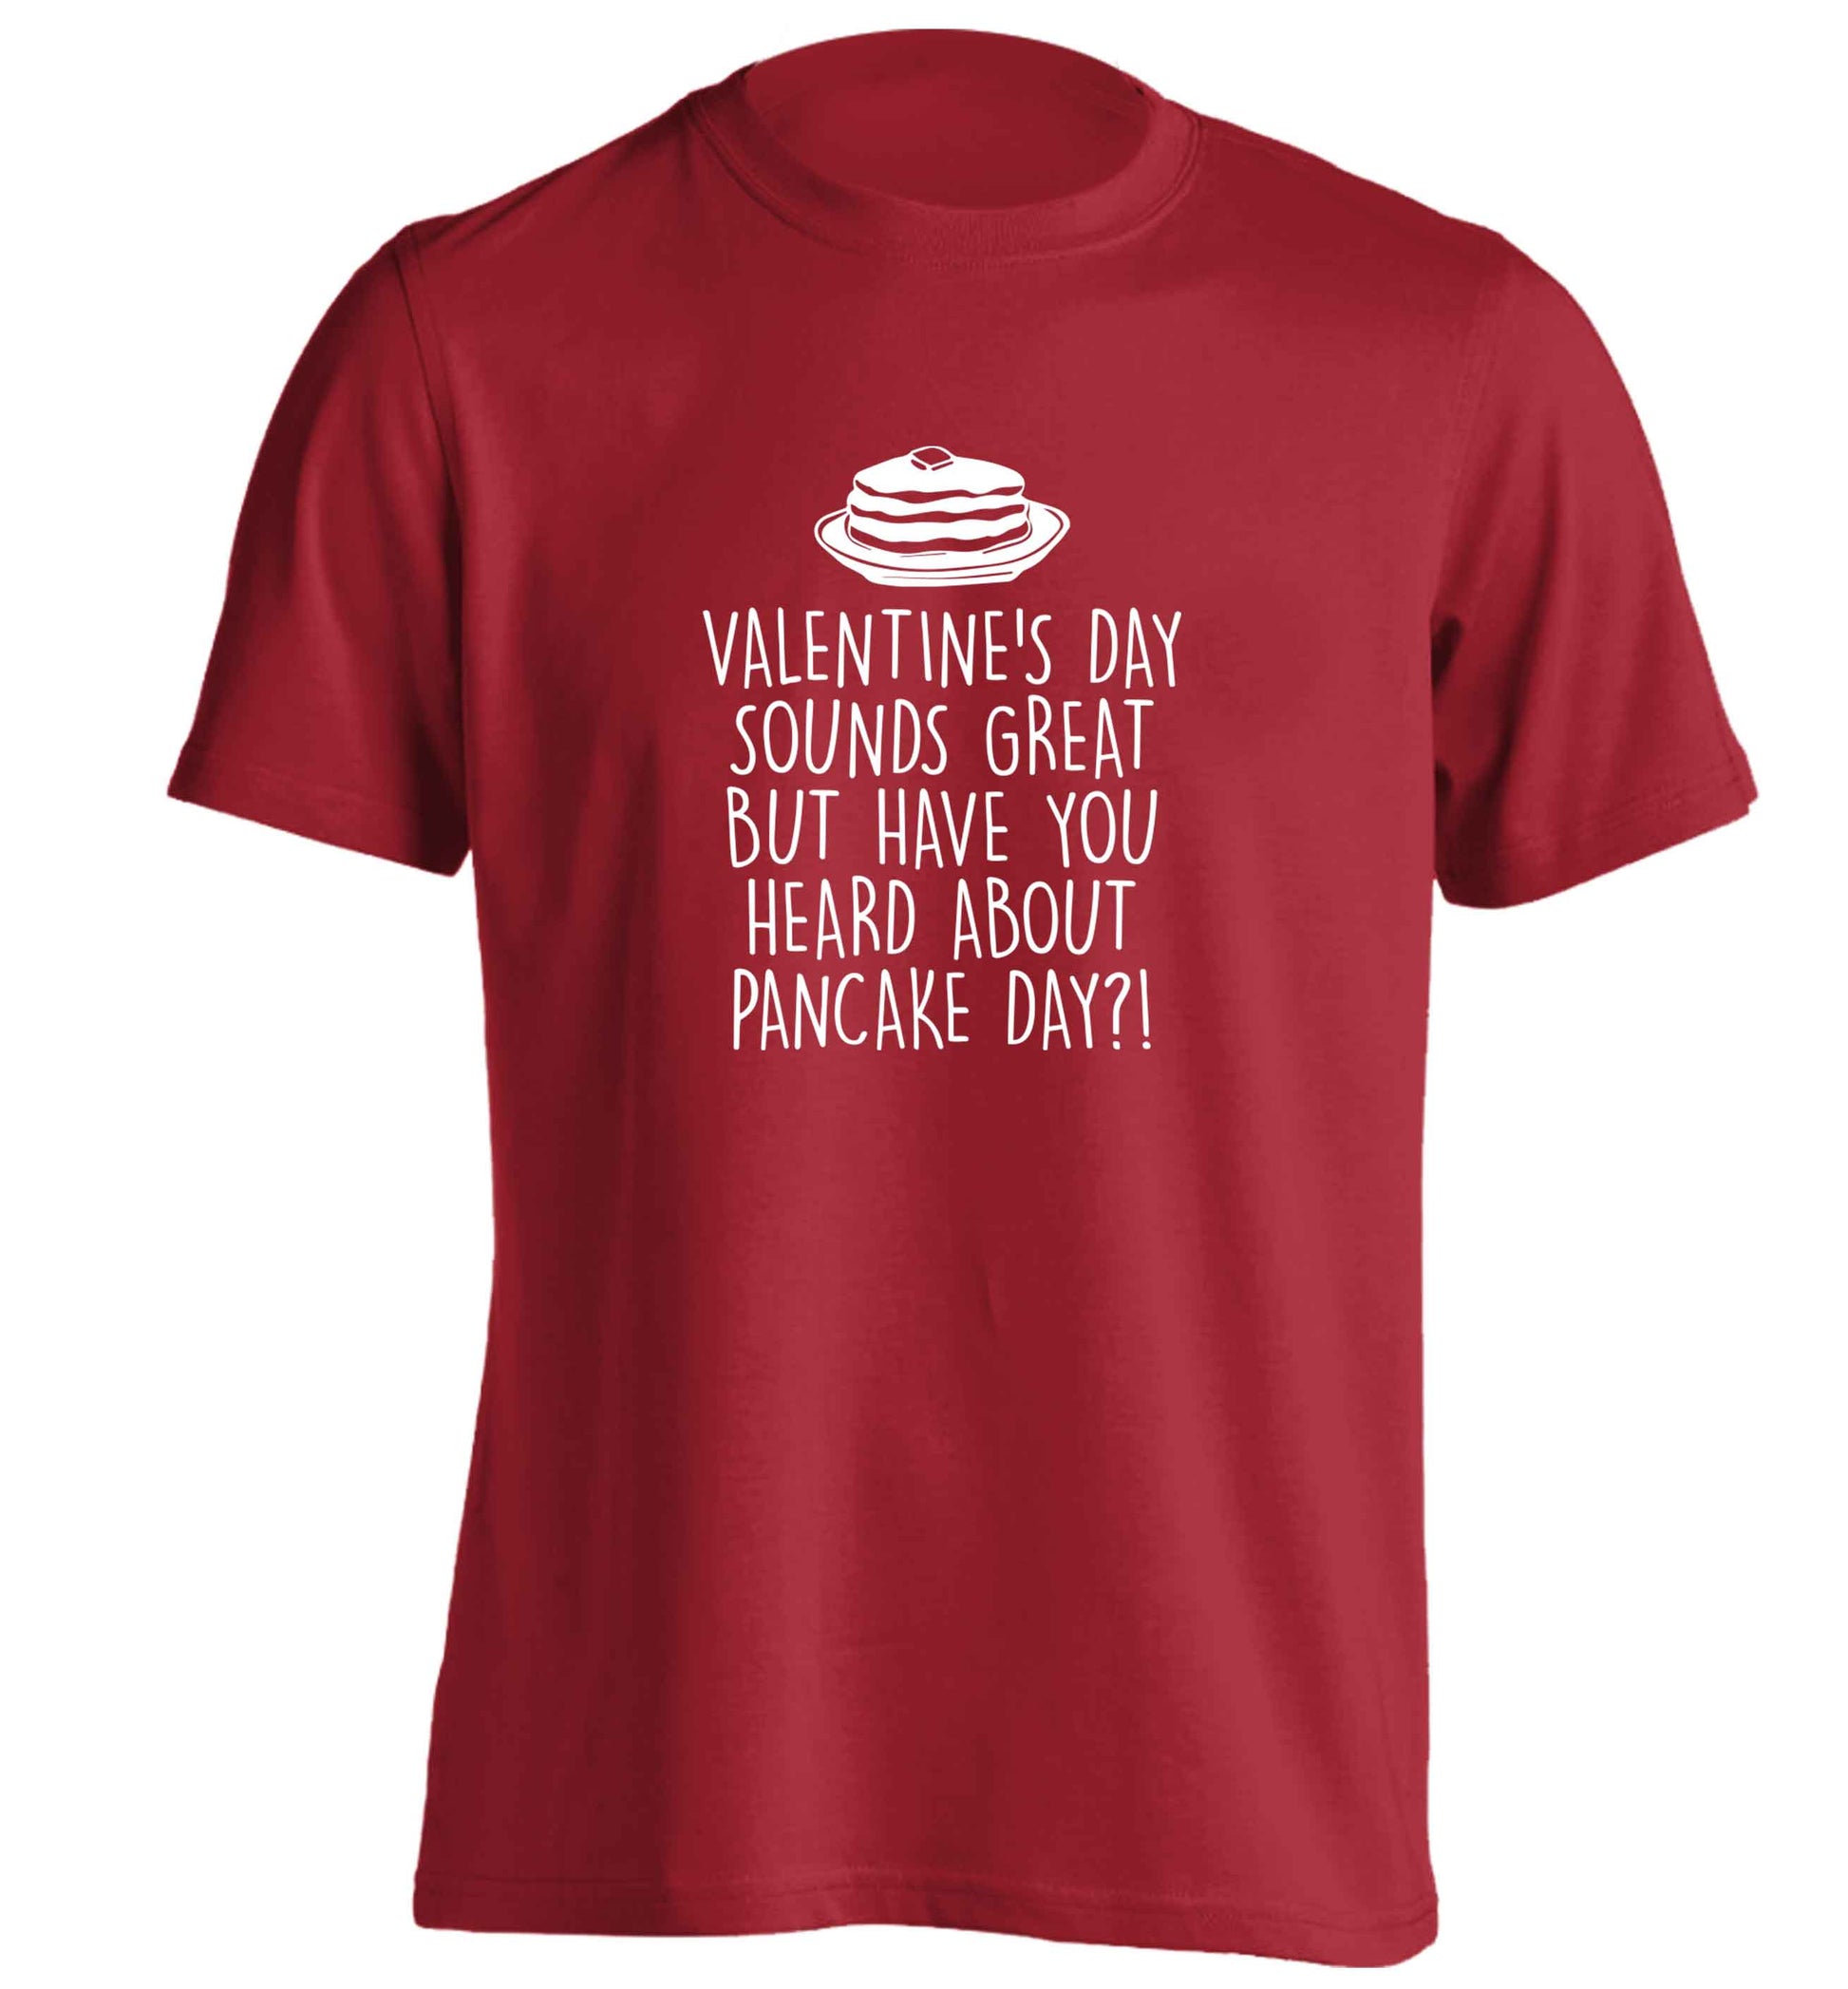 Valentine's day sounds great but have you heard about pancake day?! adults unisex red Tshirt 2XL